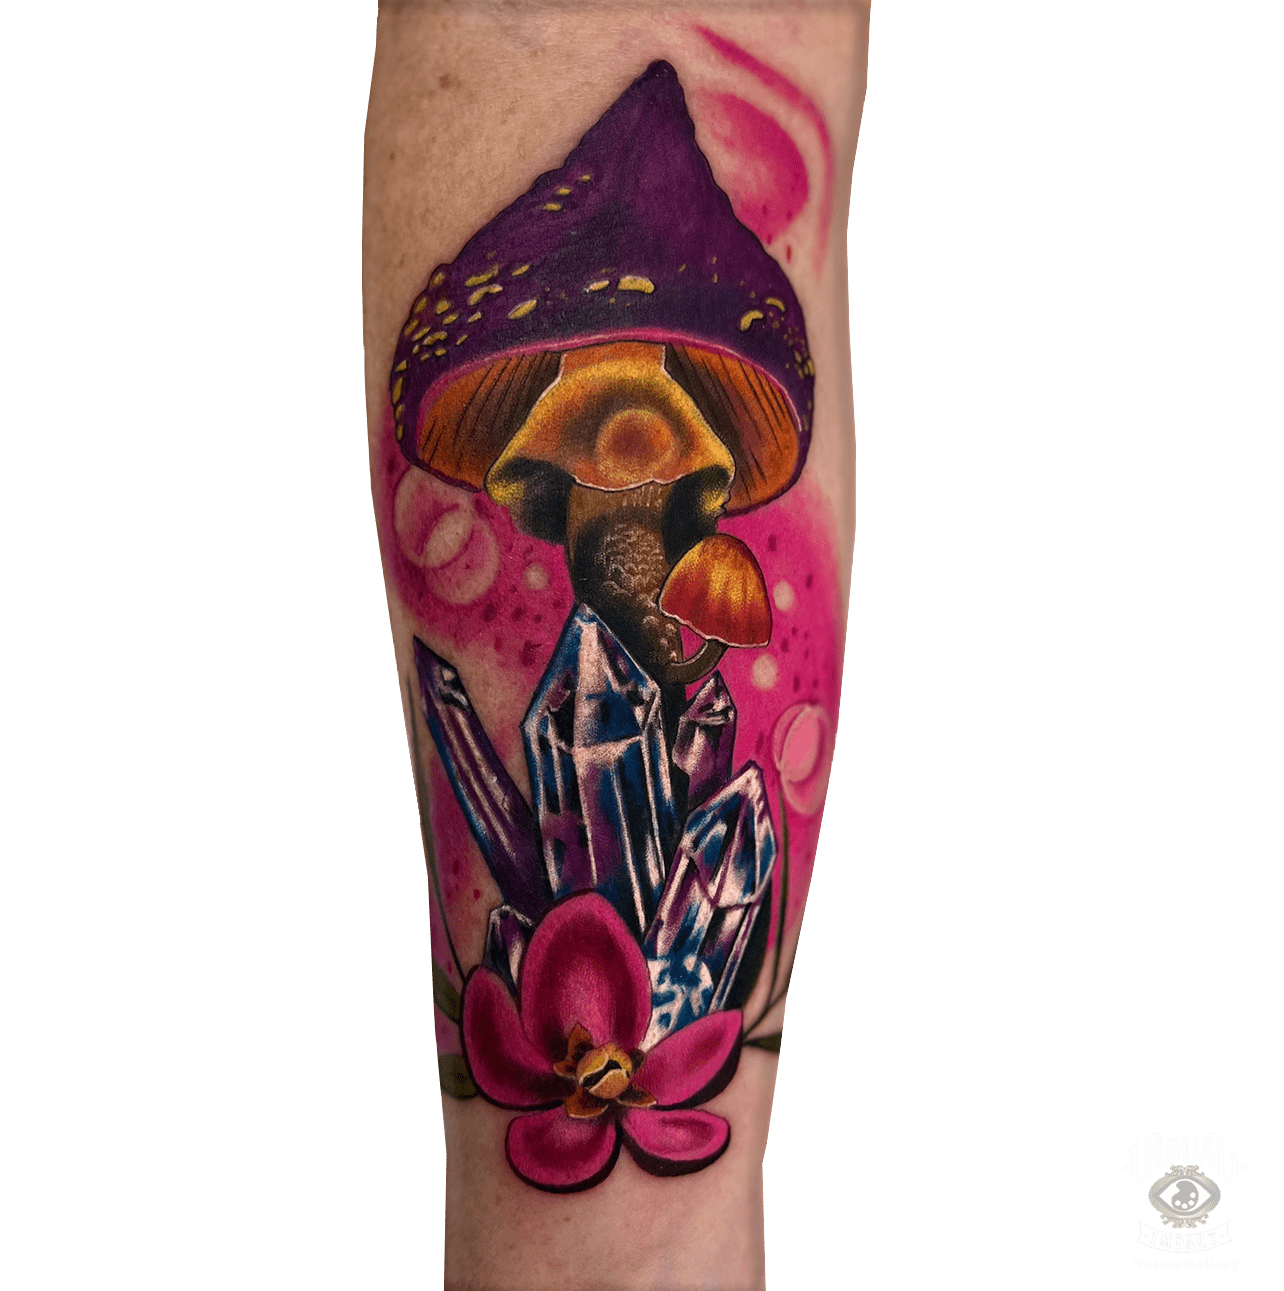 Mushroon color tattoo by Visual Impact Tattoo Gallery